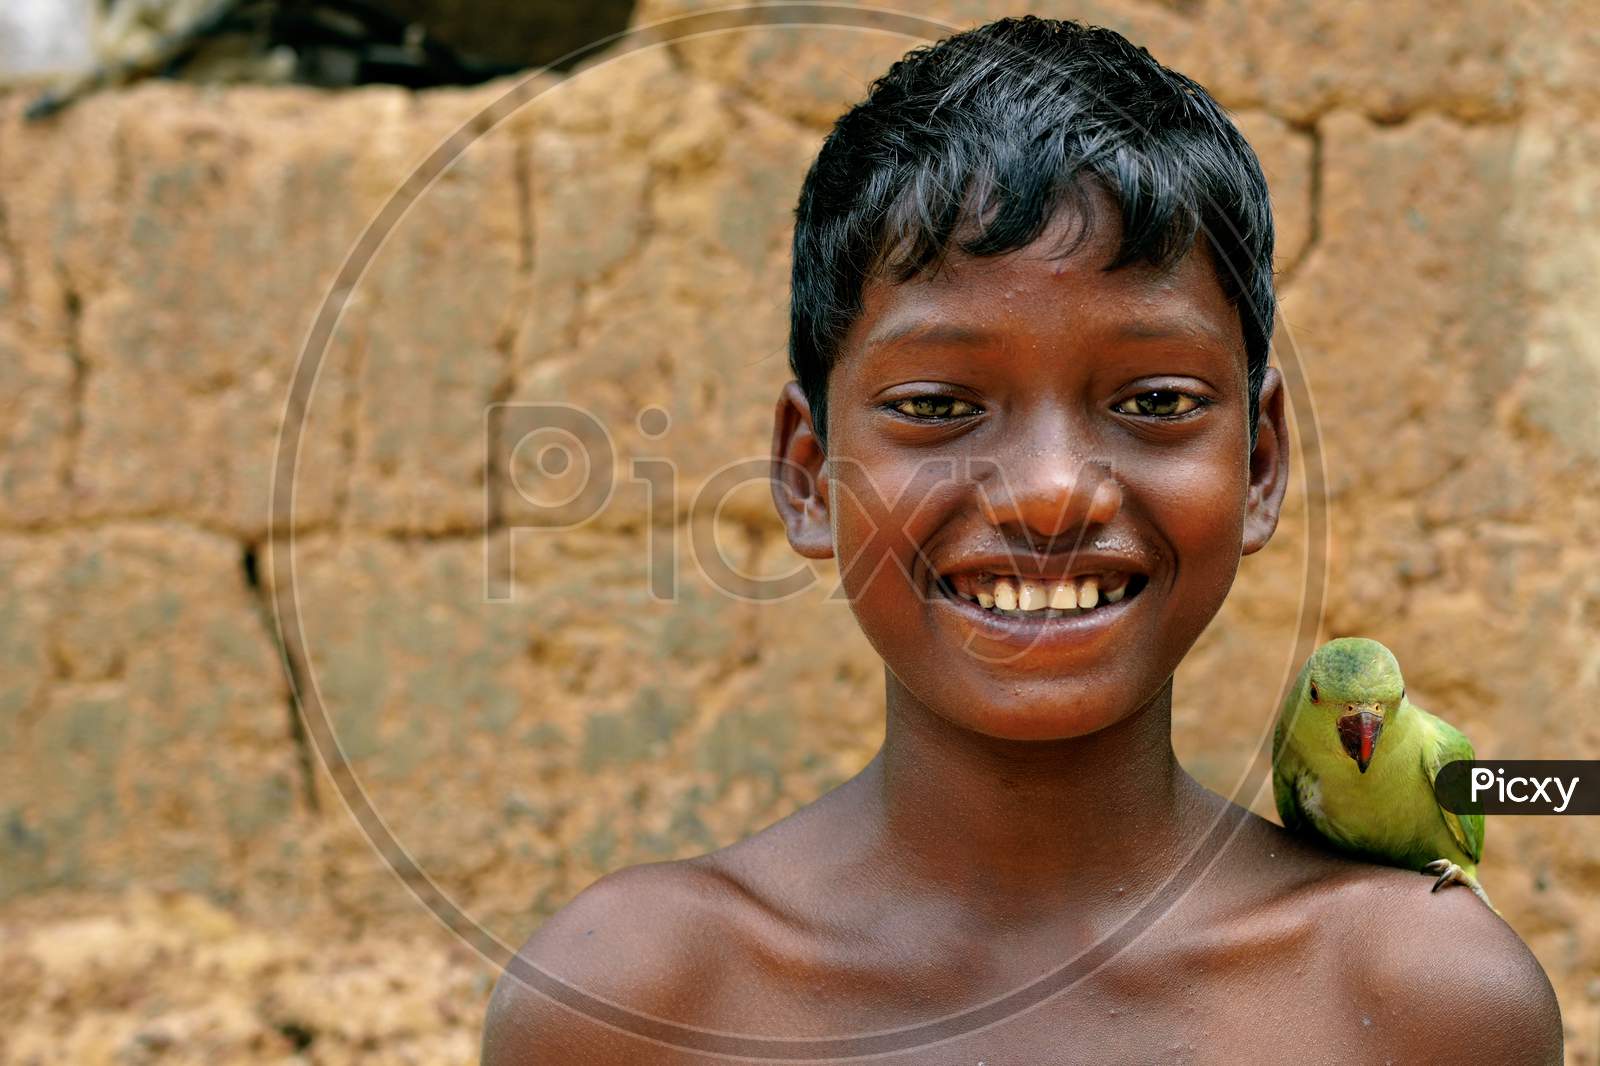 A Smiling Boy With A Parrot Sitting On His Left Shoulder